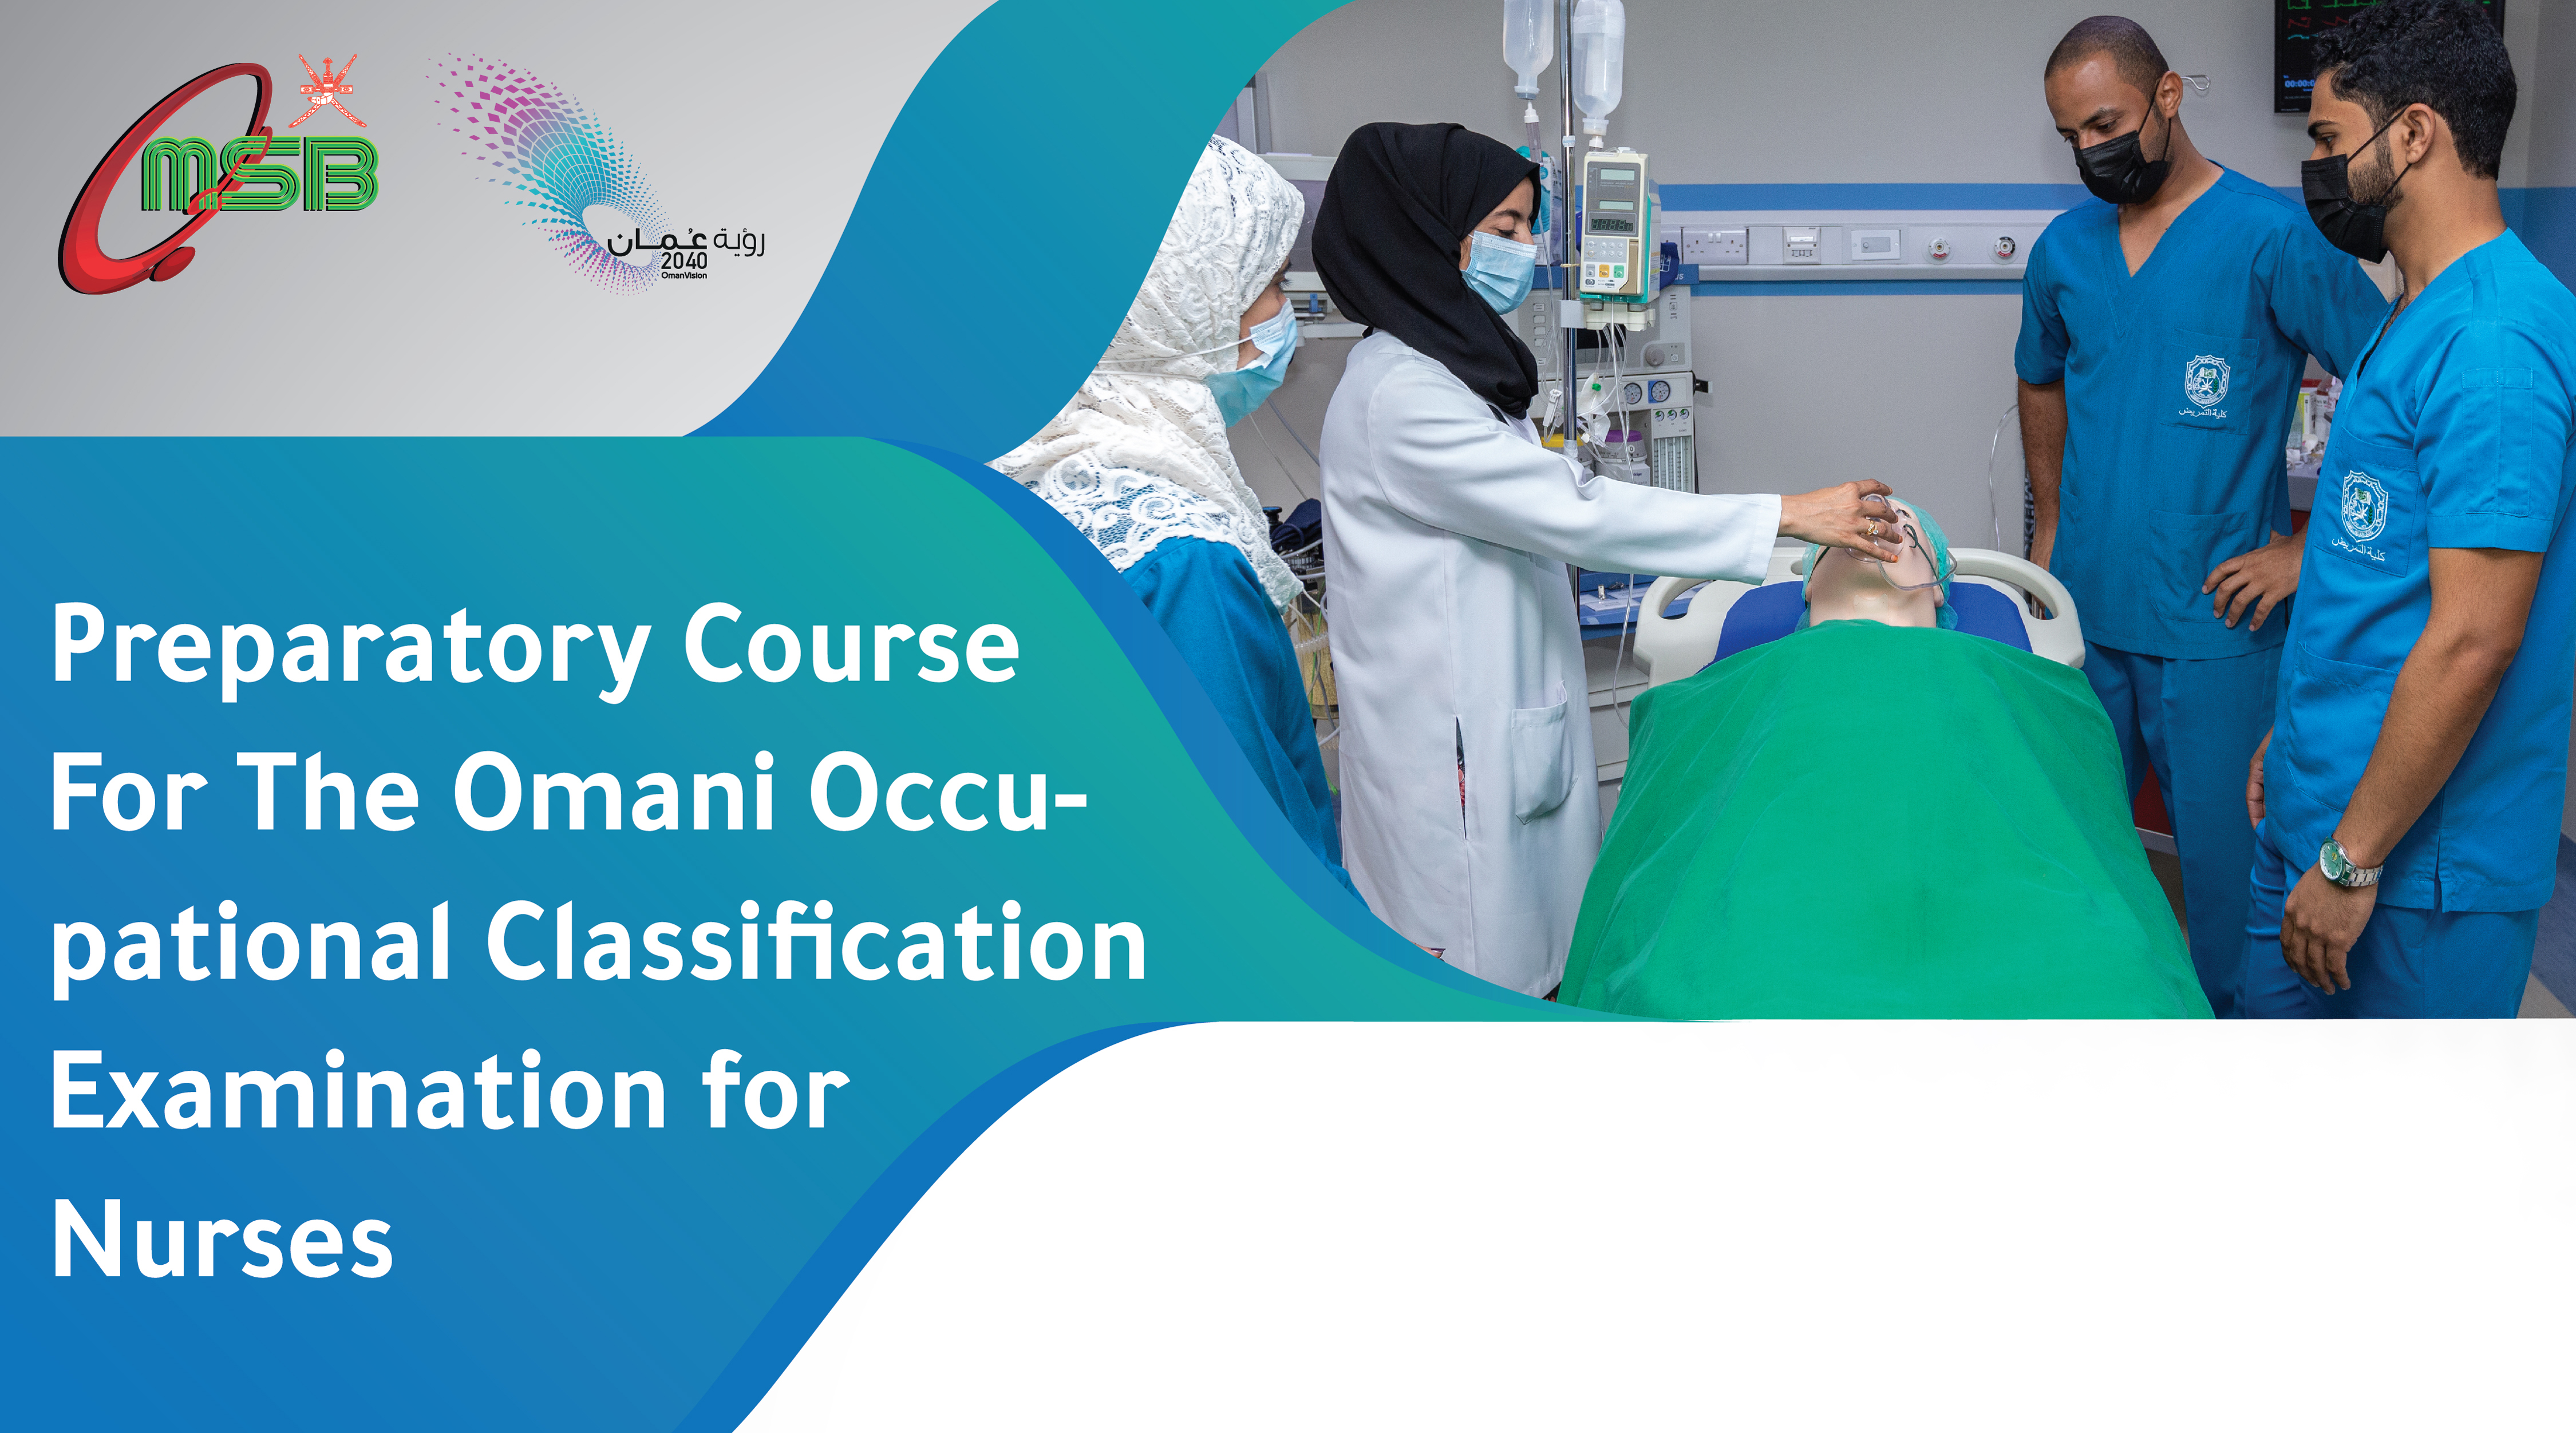 Self-Paced Learning Preparatory Course for the Omani Occupational Classification Examination for Nurses